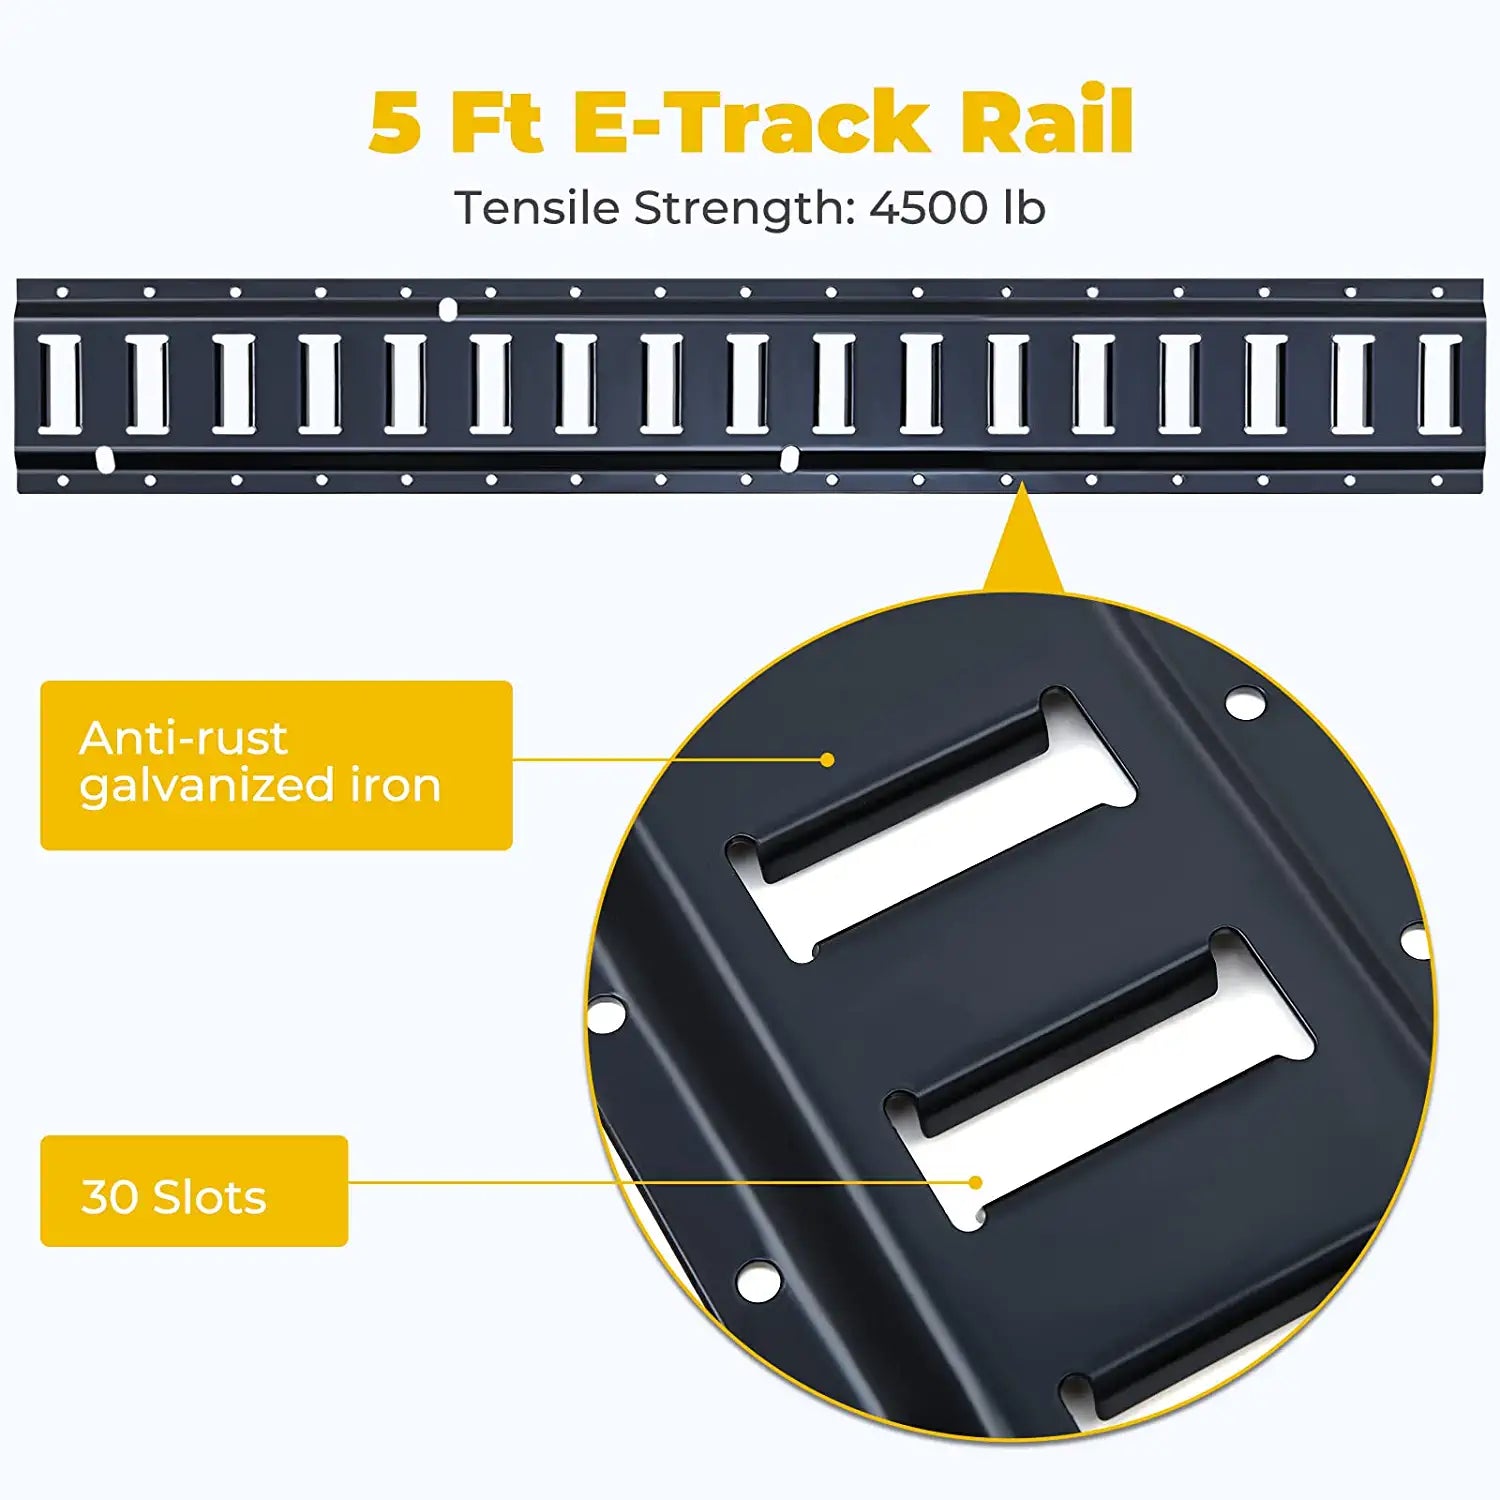 Trekassy E Track Tie-Down Kit - 12 Pieces: 4 Pack E-Track Rails & 8 E Track Tie-Down Accessories for Truck Bed, Trailers